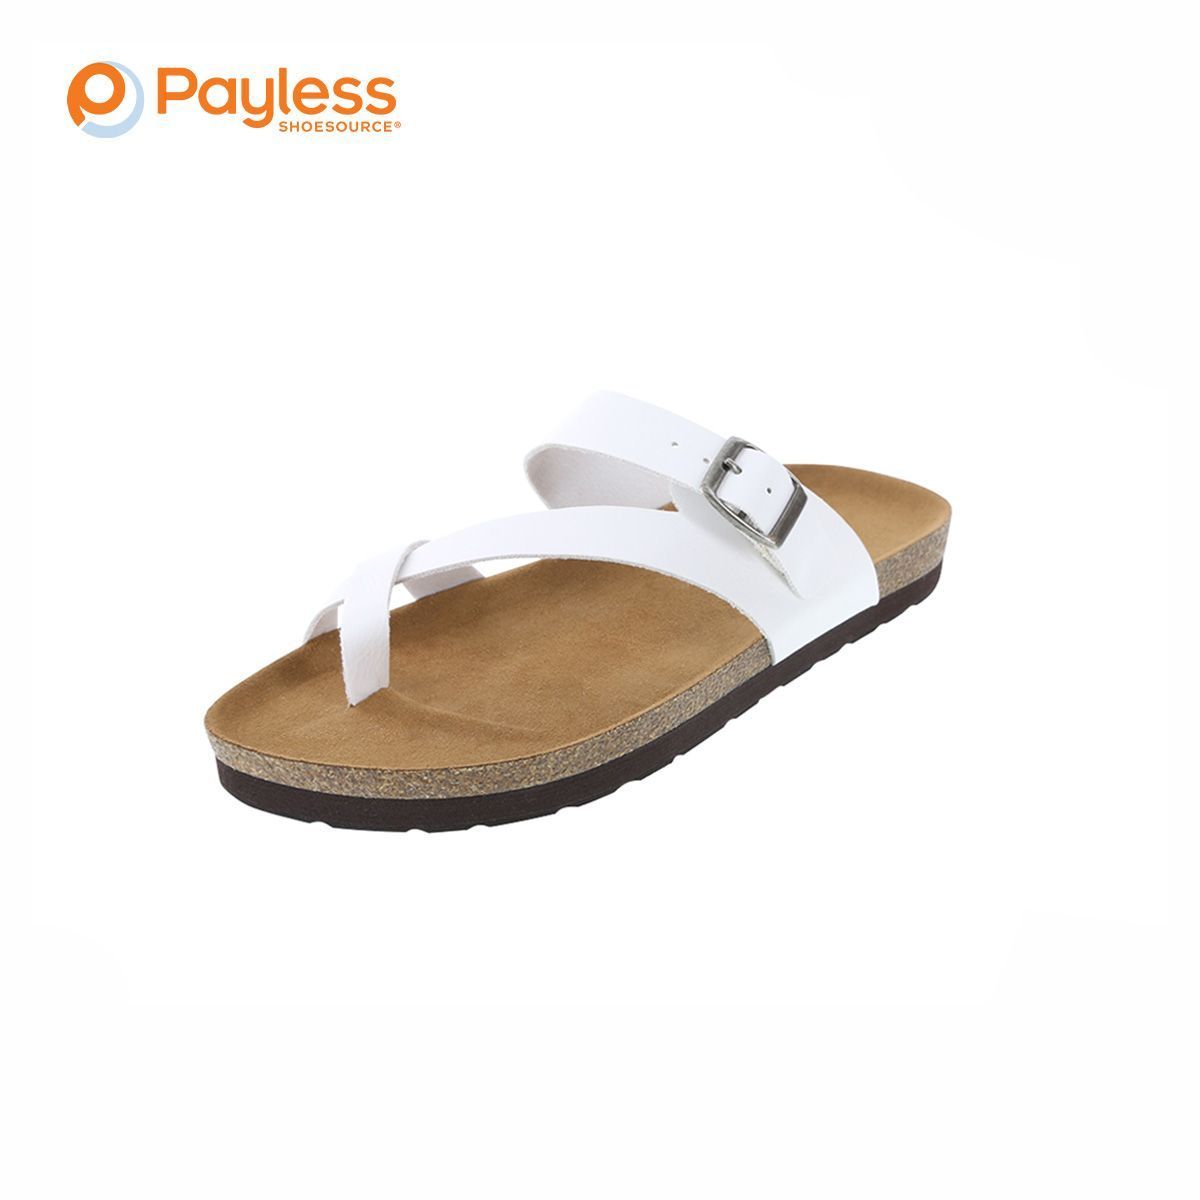 BRASH sandals by payless | Sandals, Payless shoes, Shoe brands